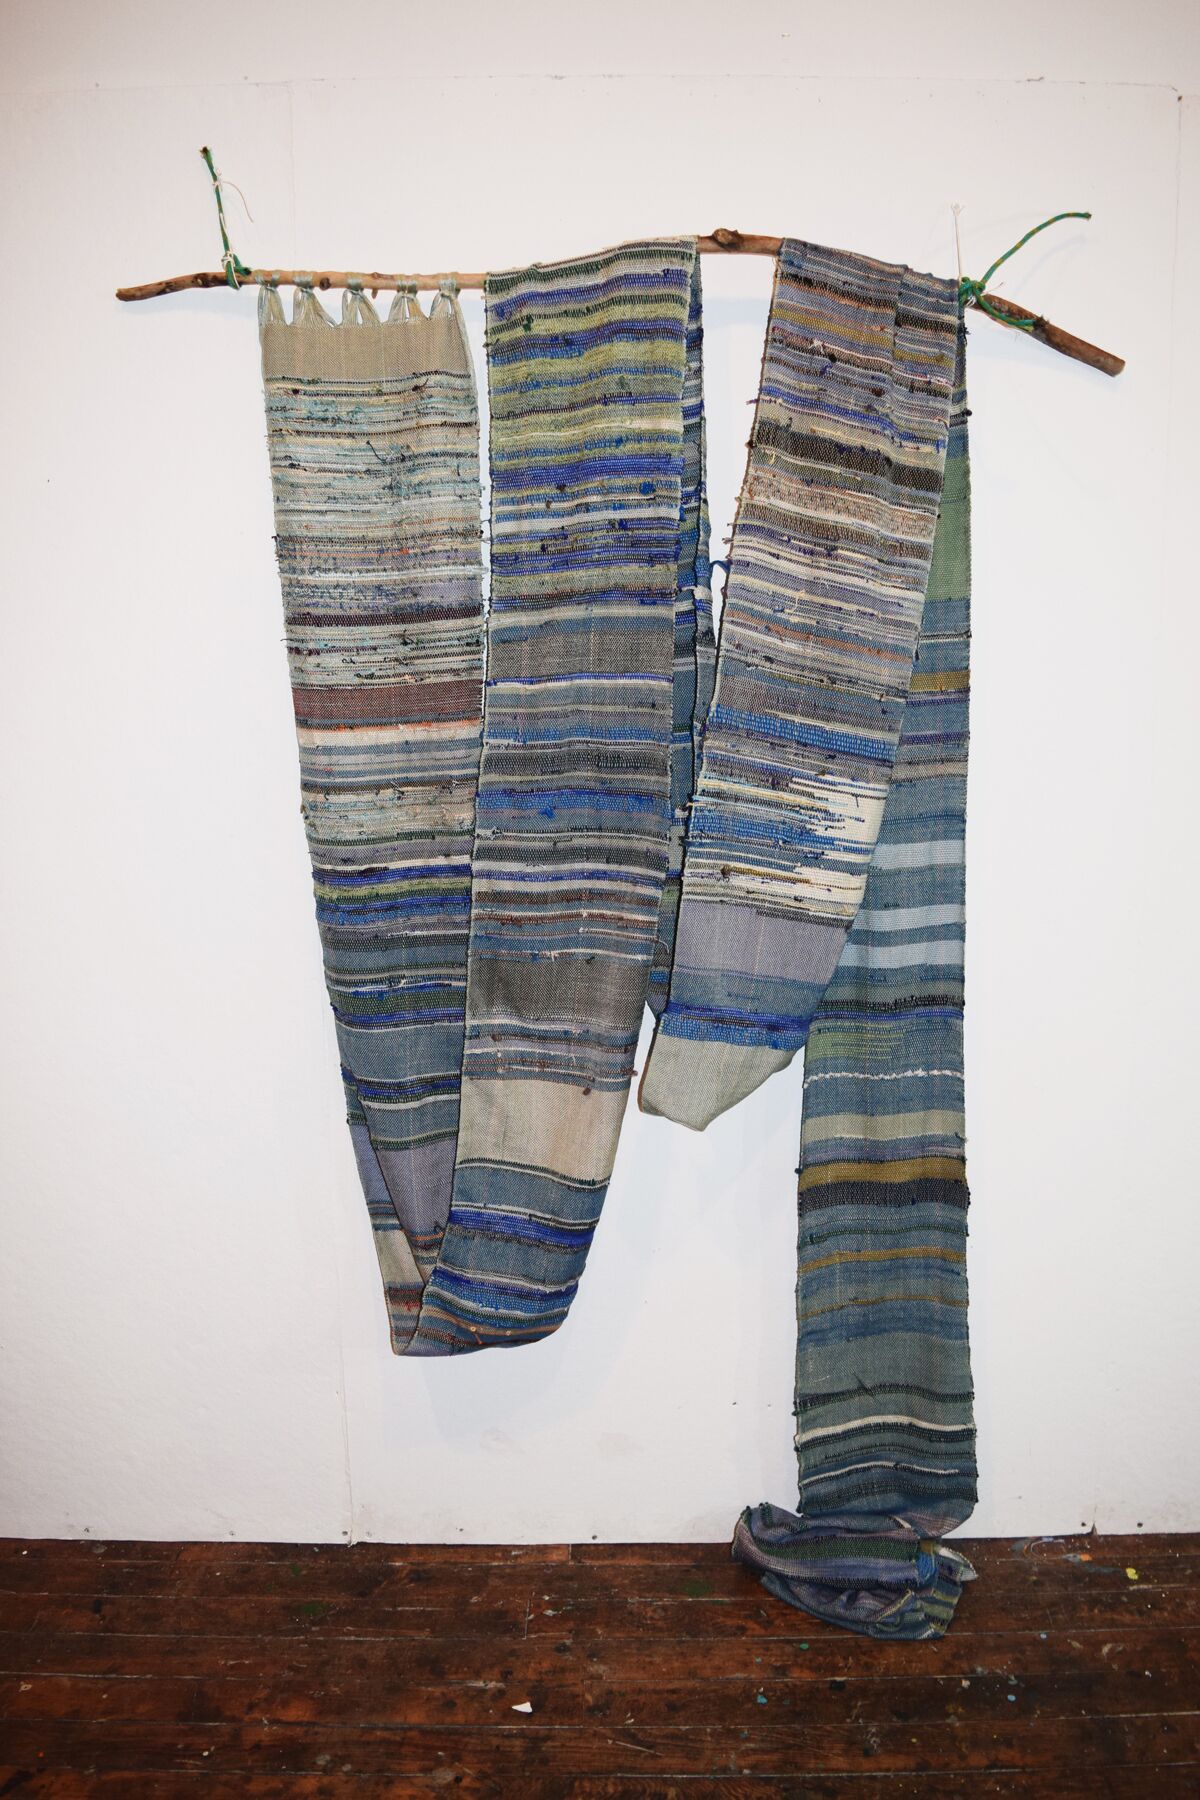  Stacey Piwinski,&nbsp; What Once Was , handwoven fabric and found objects,&nbsp;78 x 58 x 4,&nbsp;$3,500 